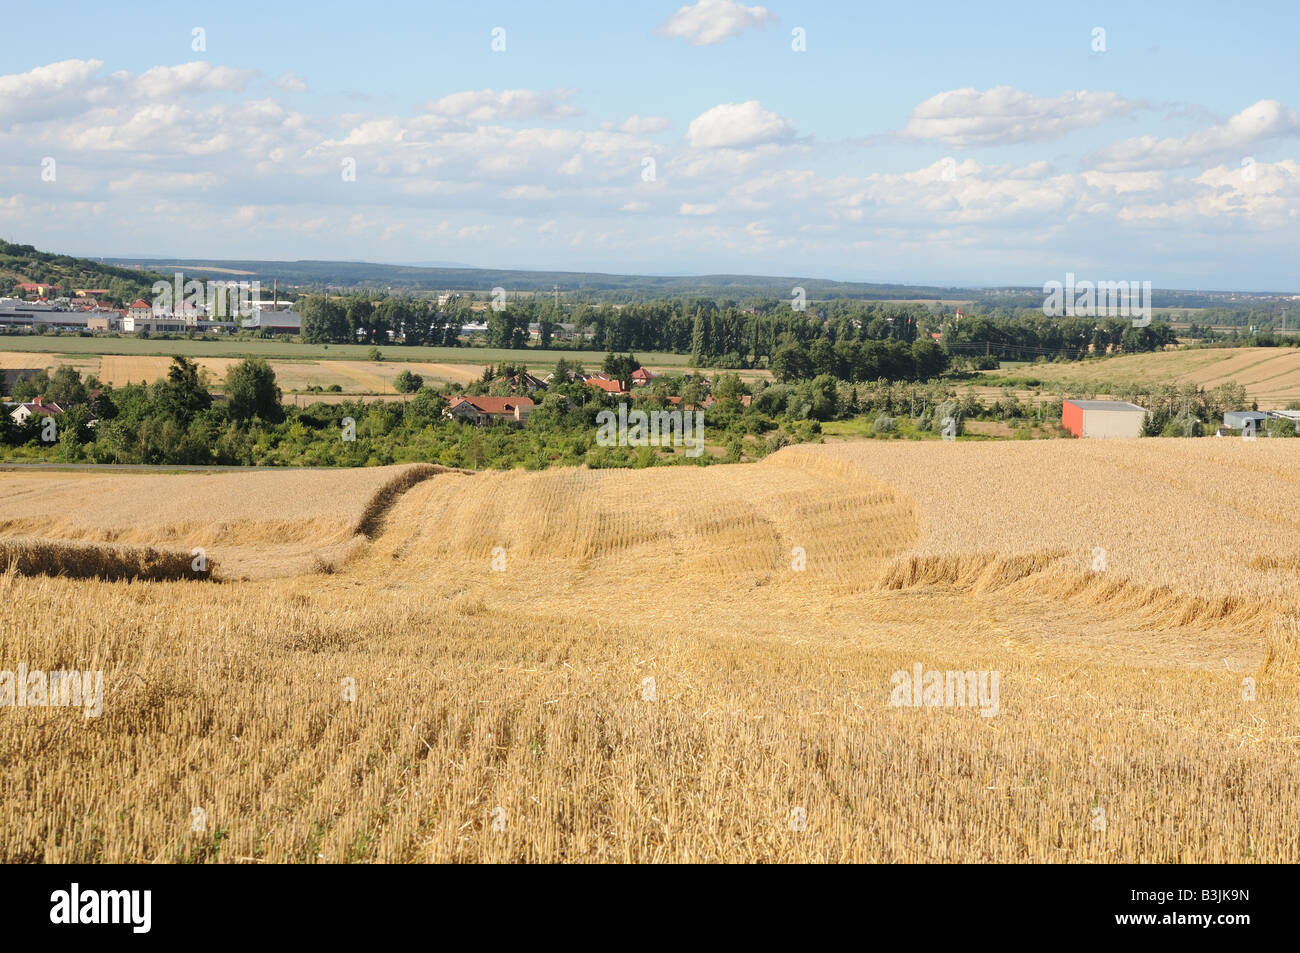 Half harvested wheat corn field with lodged areas. On the horizon green cultivated landscape. Stock Photo